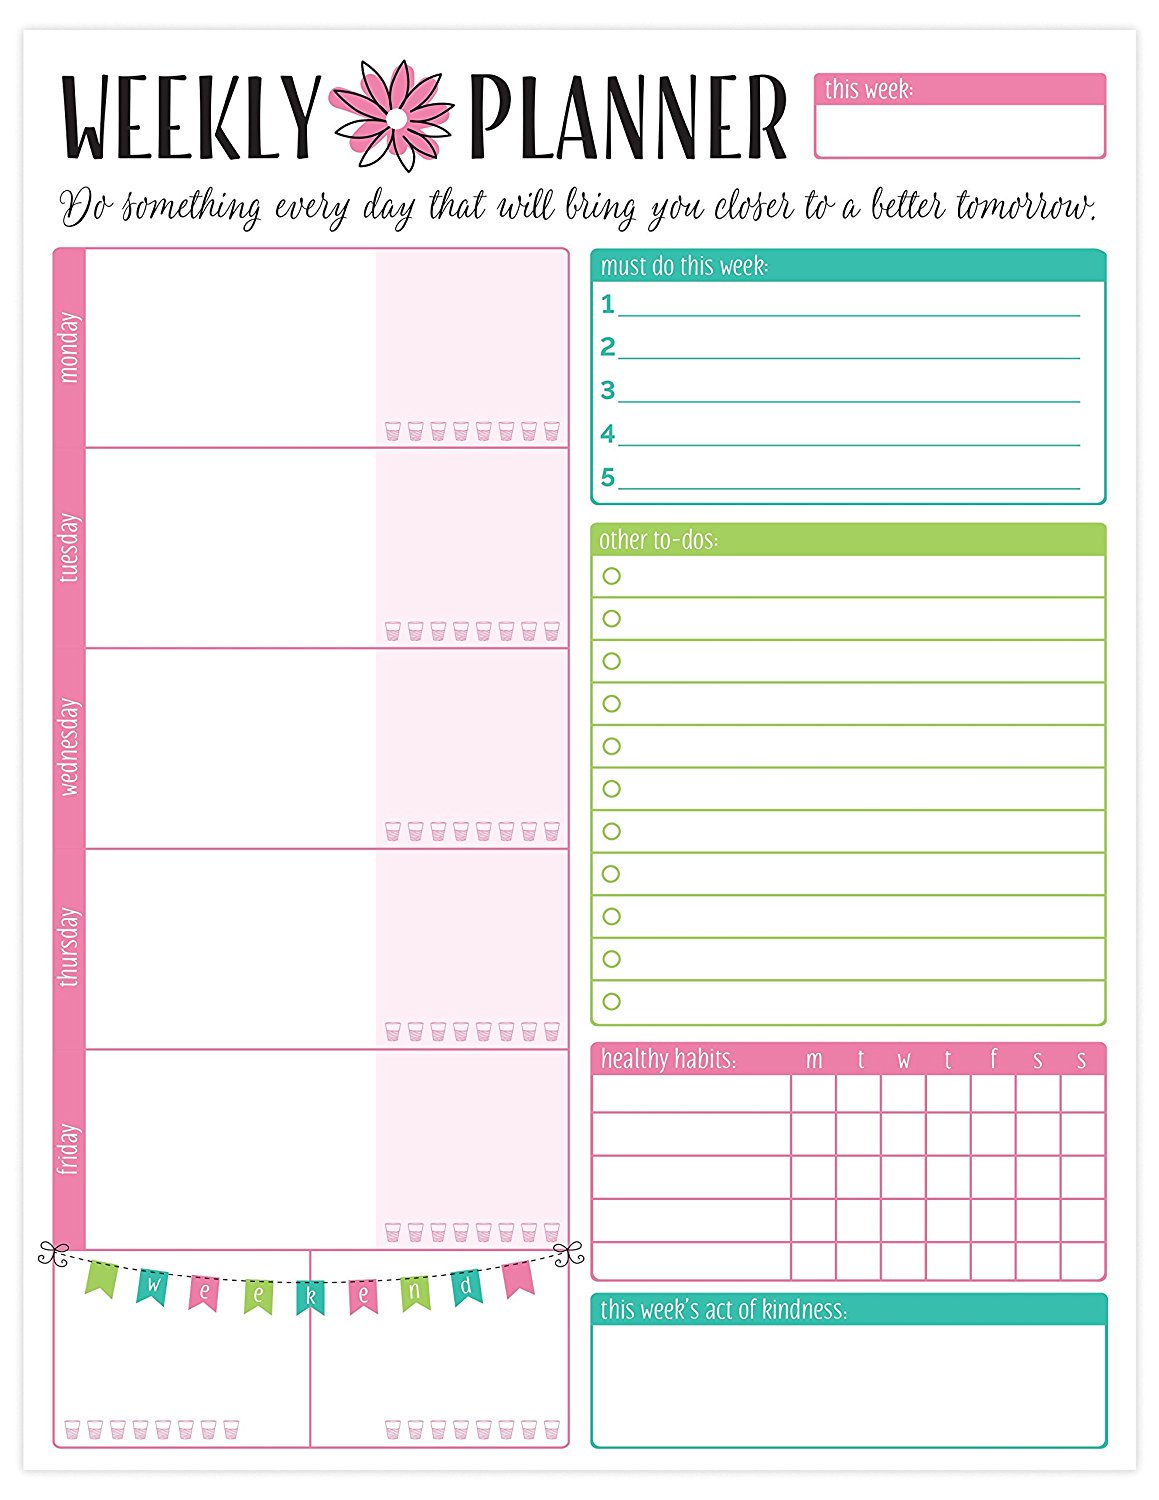 daily-printable-doc-word-file-download-daily-planners